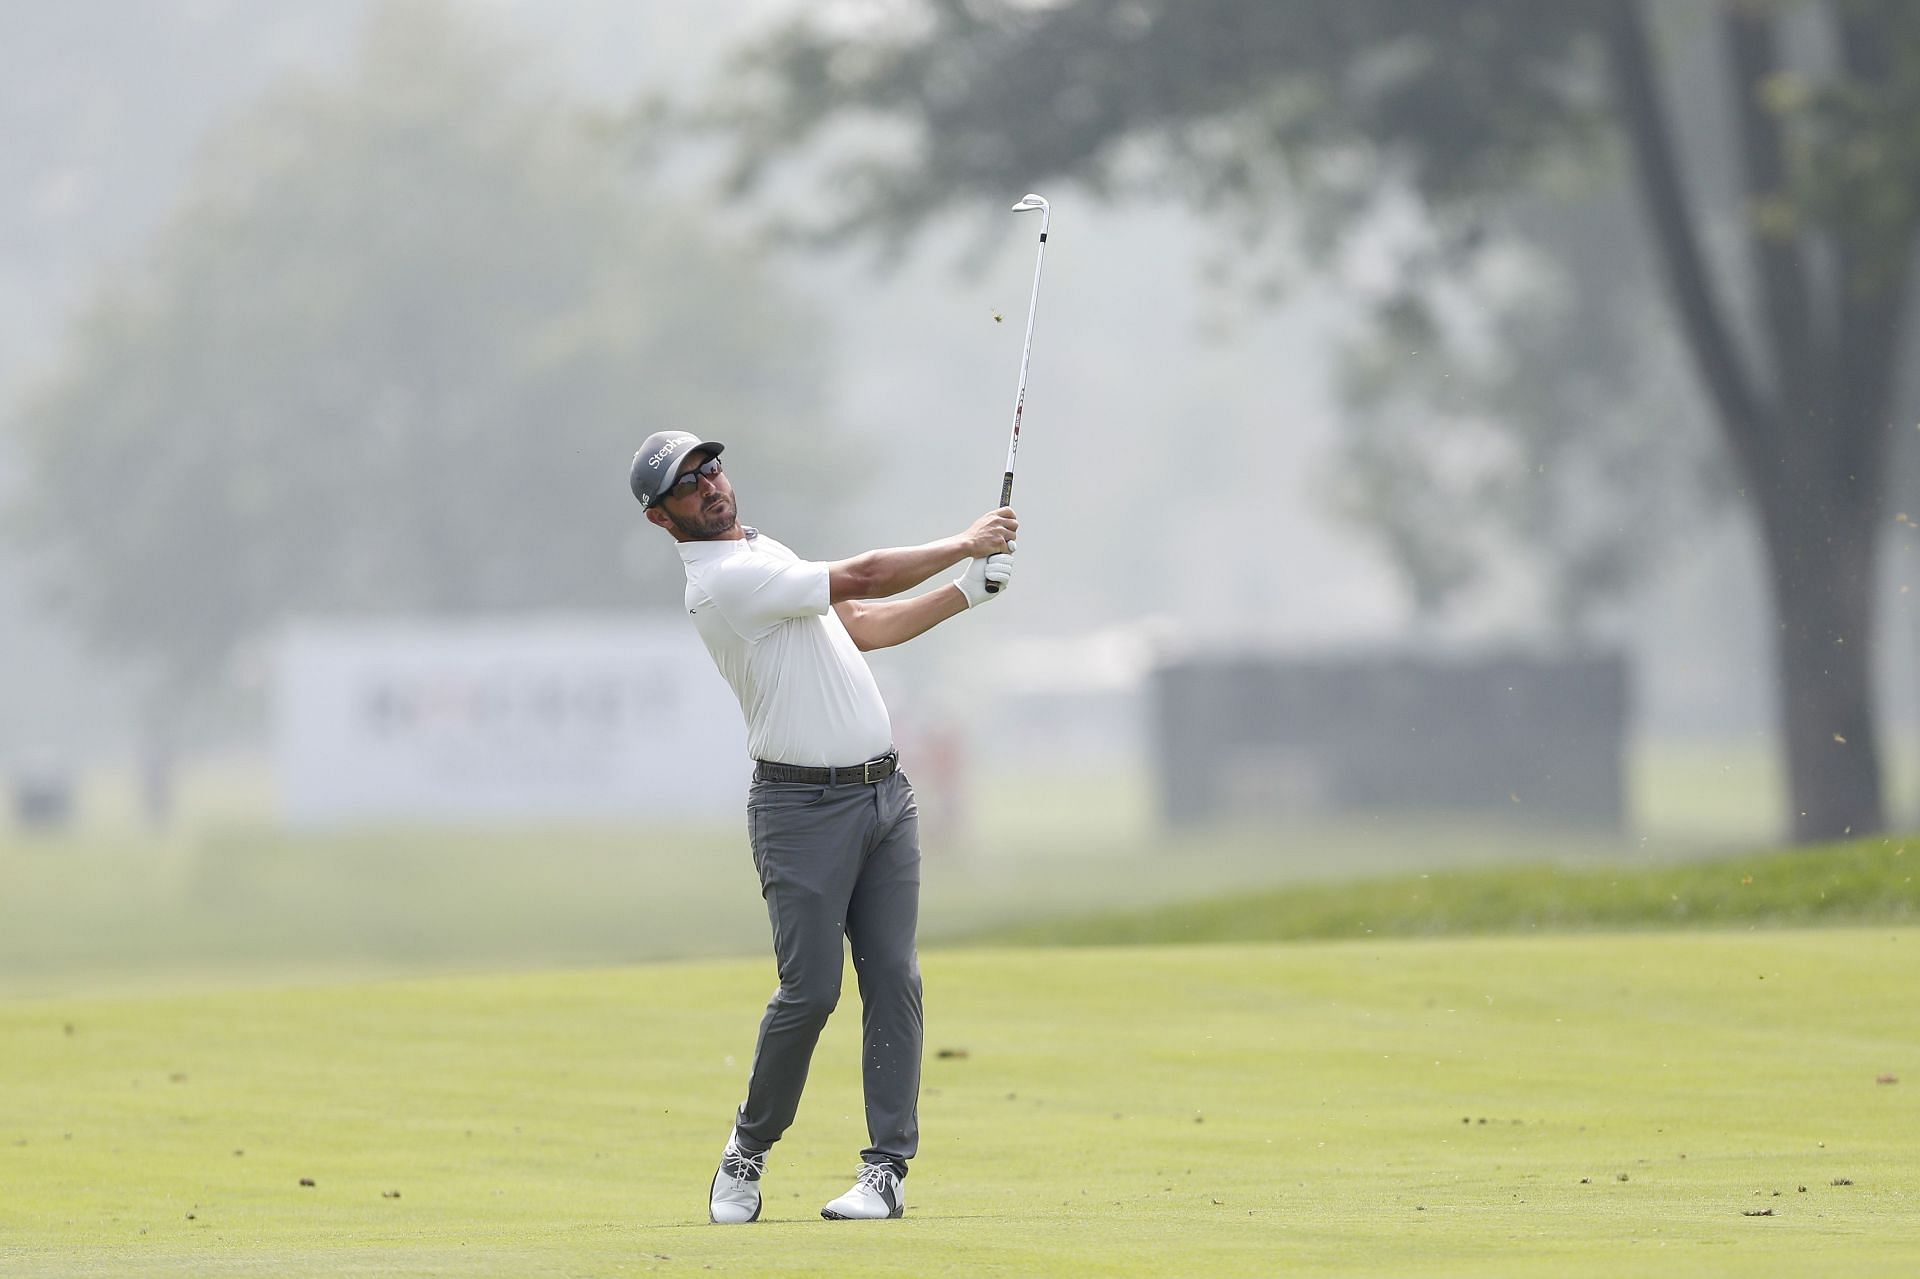 Andrew Landry at the 2023 Rocket Mortgage Classic - Round One (Image via Getty).